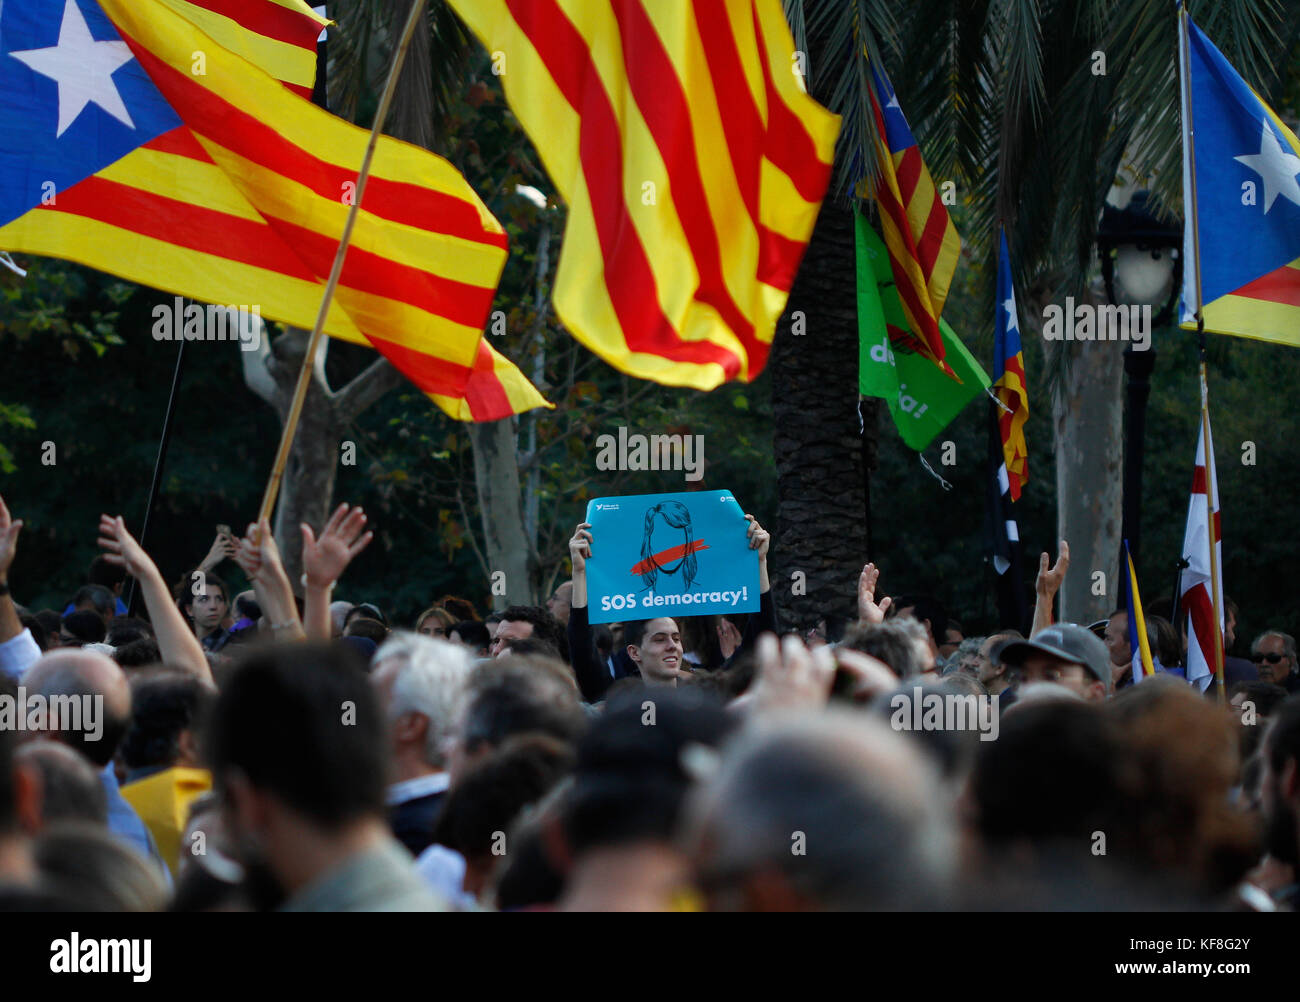 People wait in the streets of Barcelona, Spain on October 10, 2017 for President of Catalonia Carles Puigdemont to Stock Photo